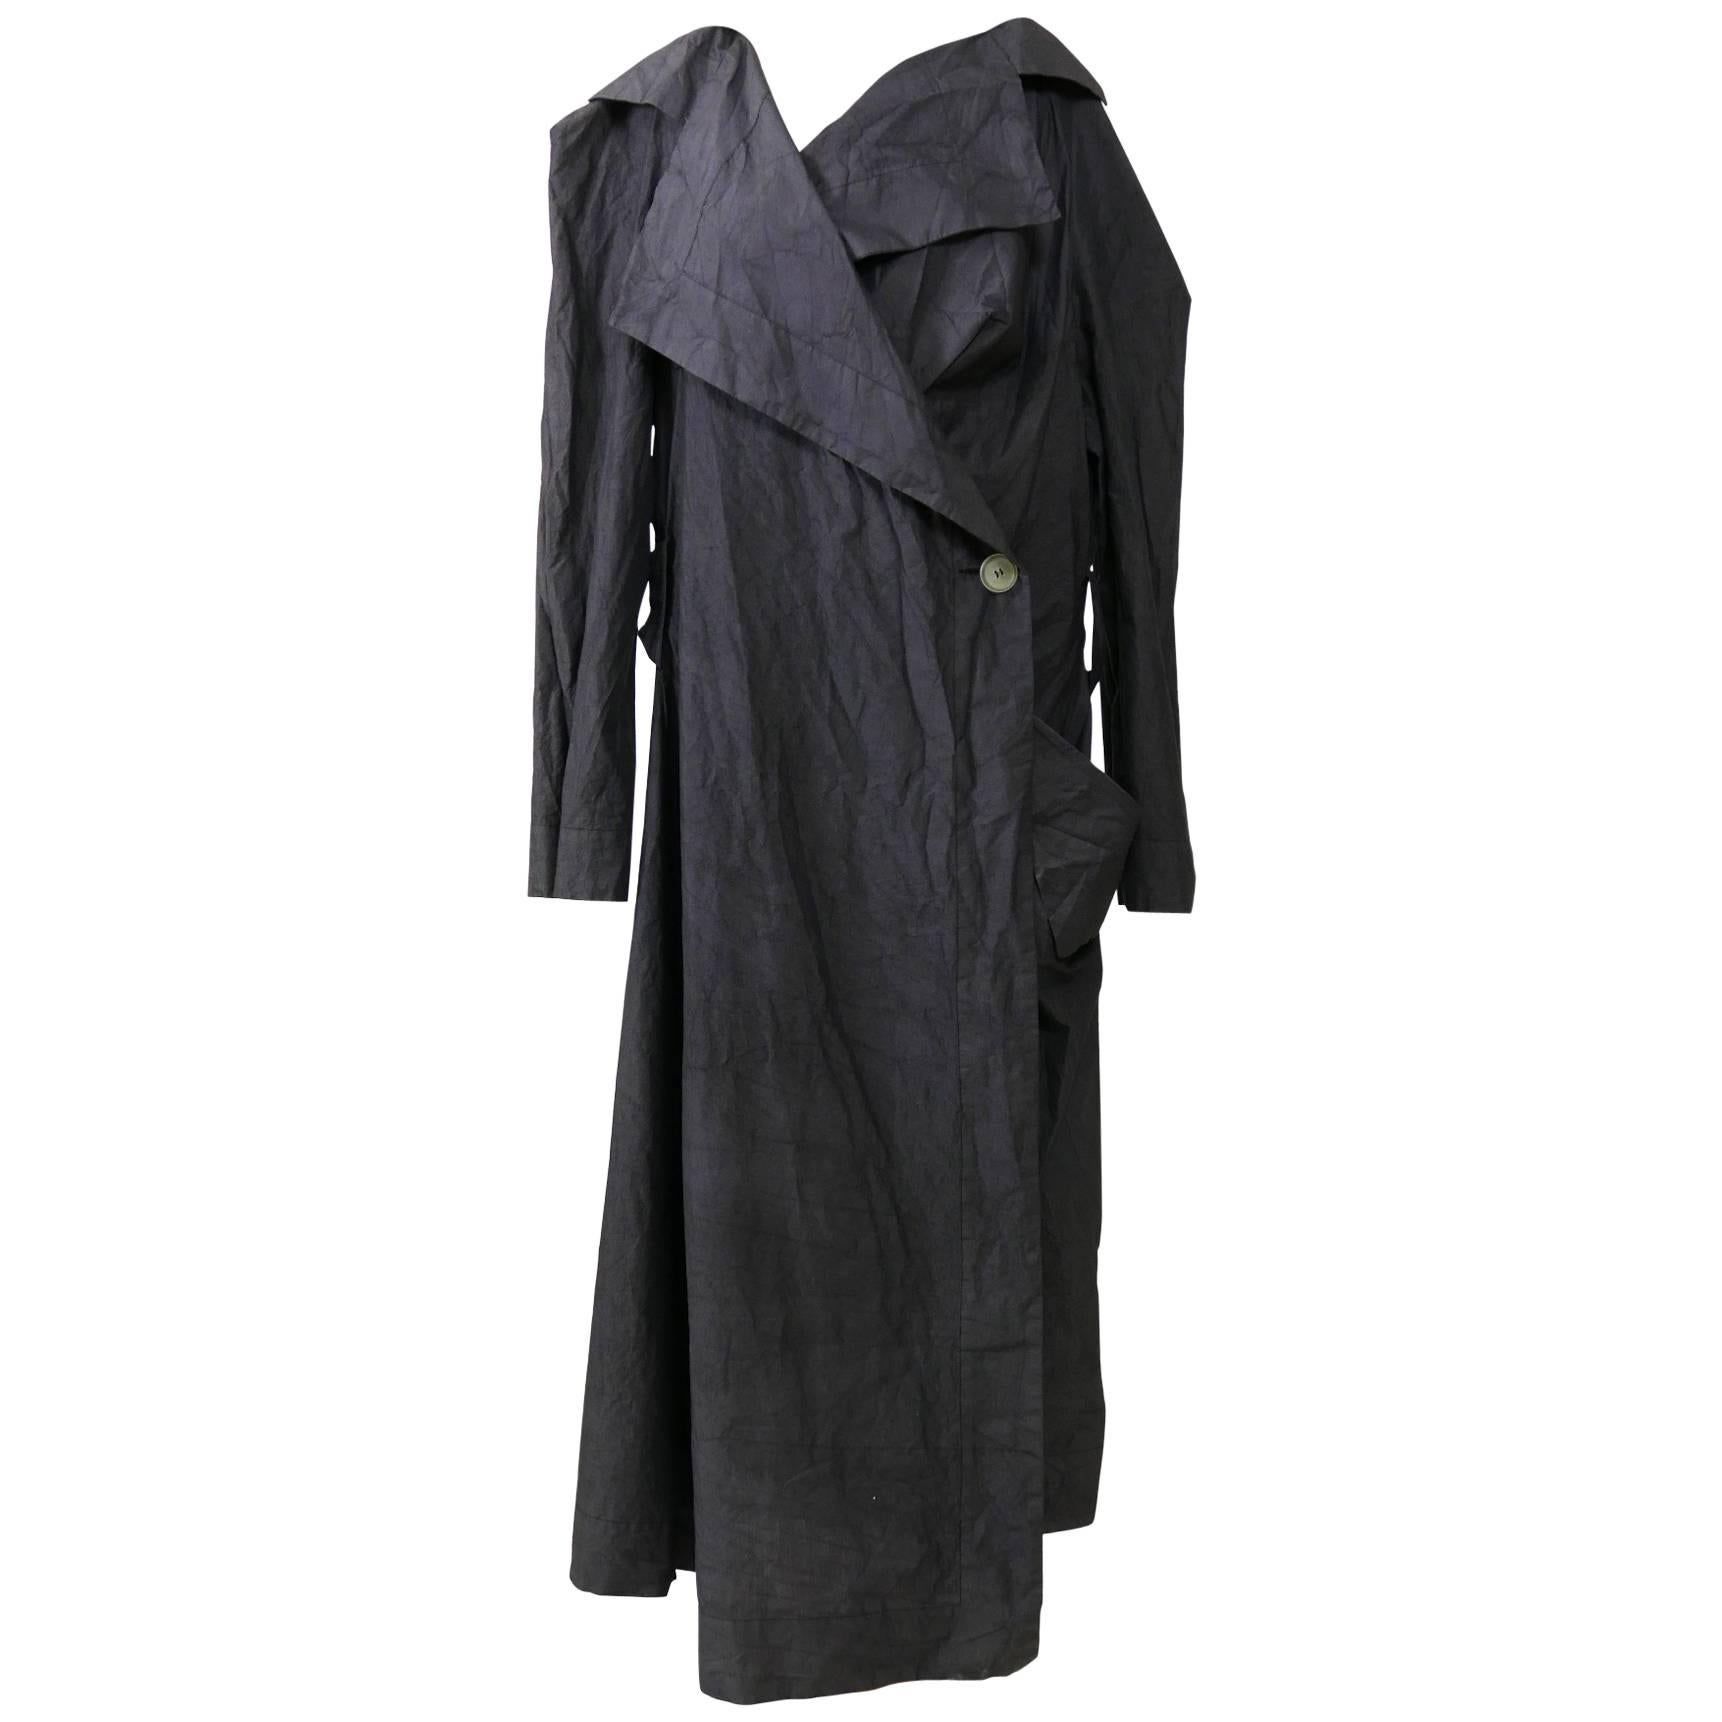 VIVIENNE WESTWOOD ANGLOMANIA Gray Long Coat